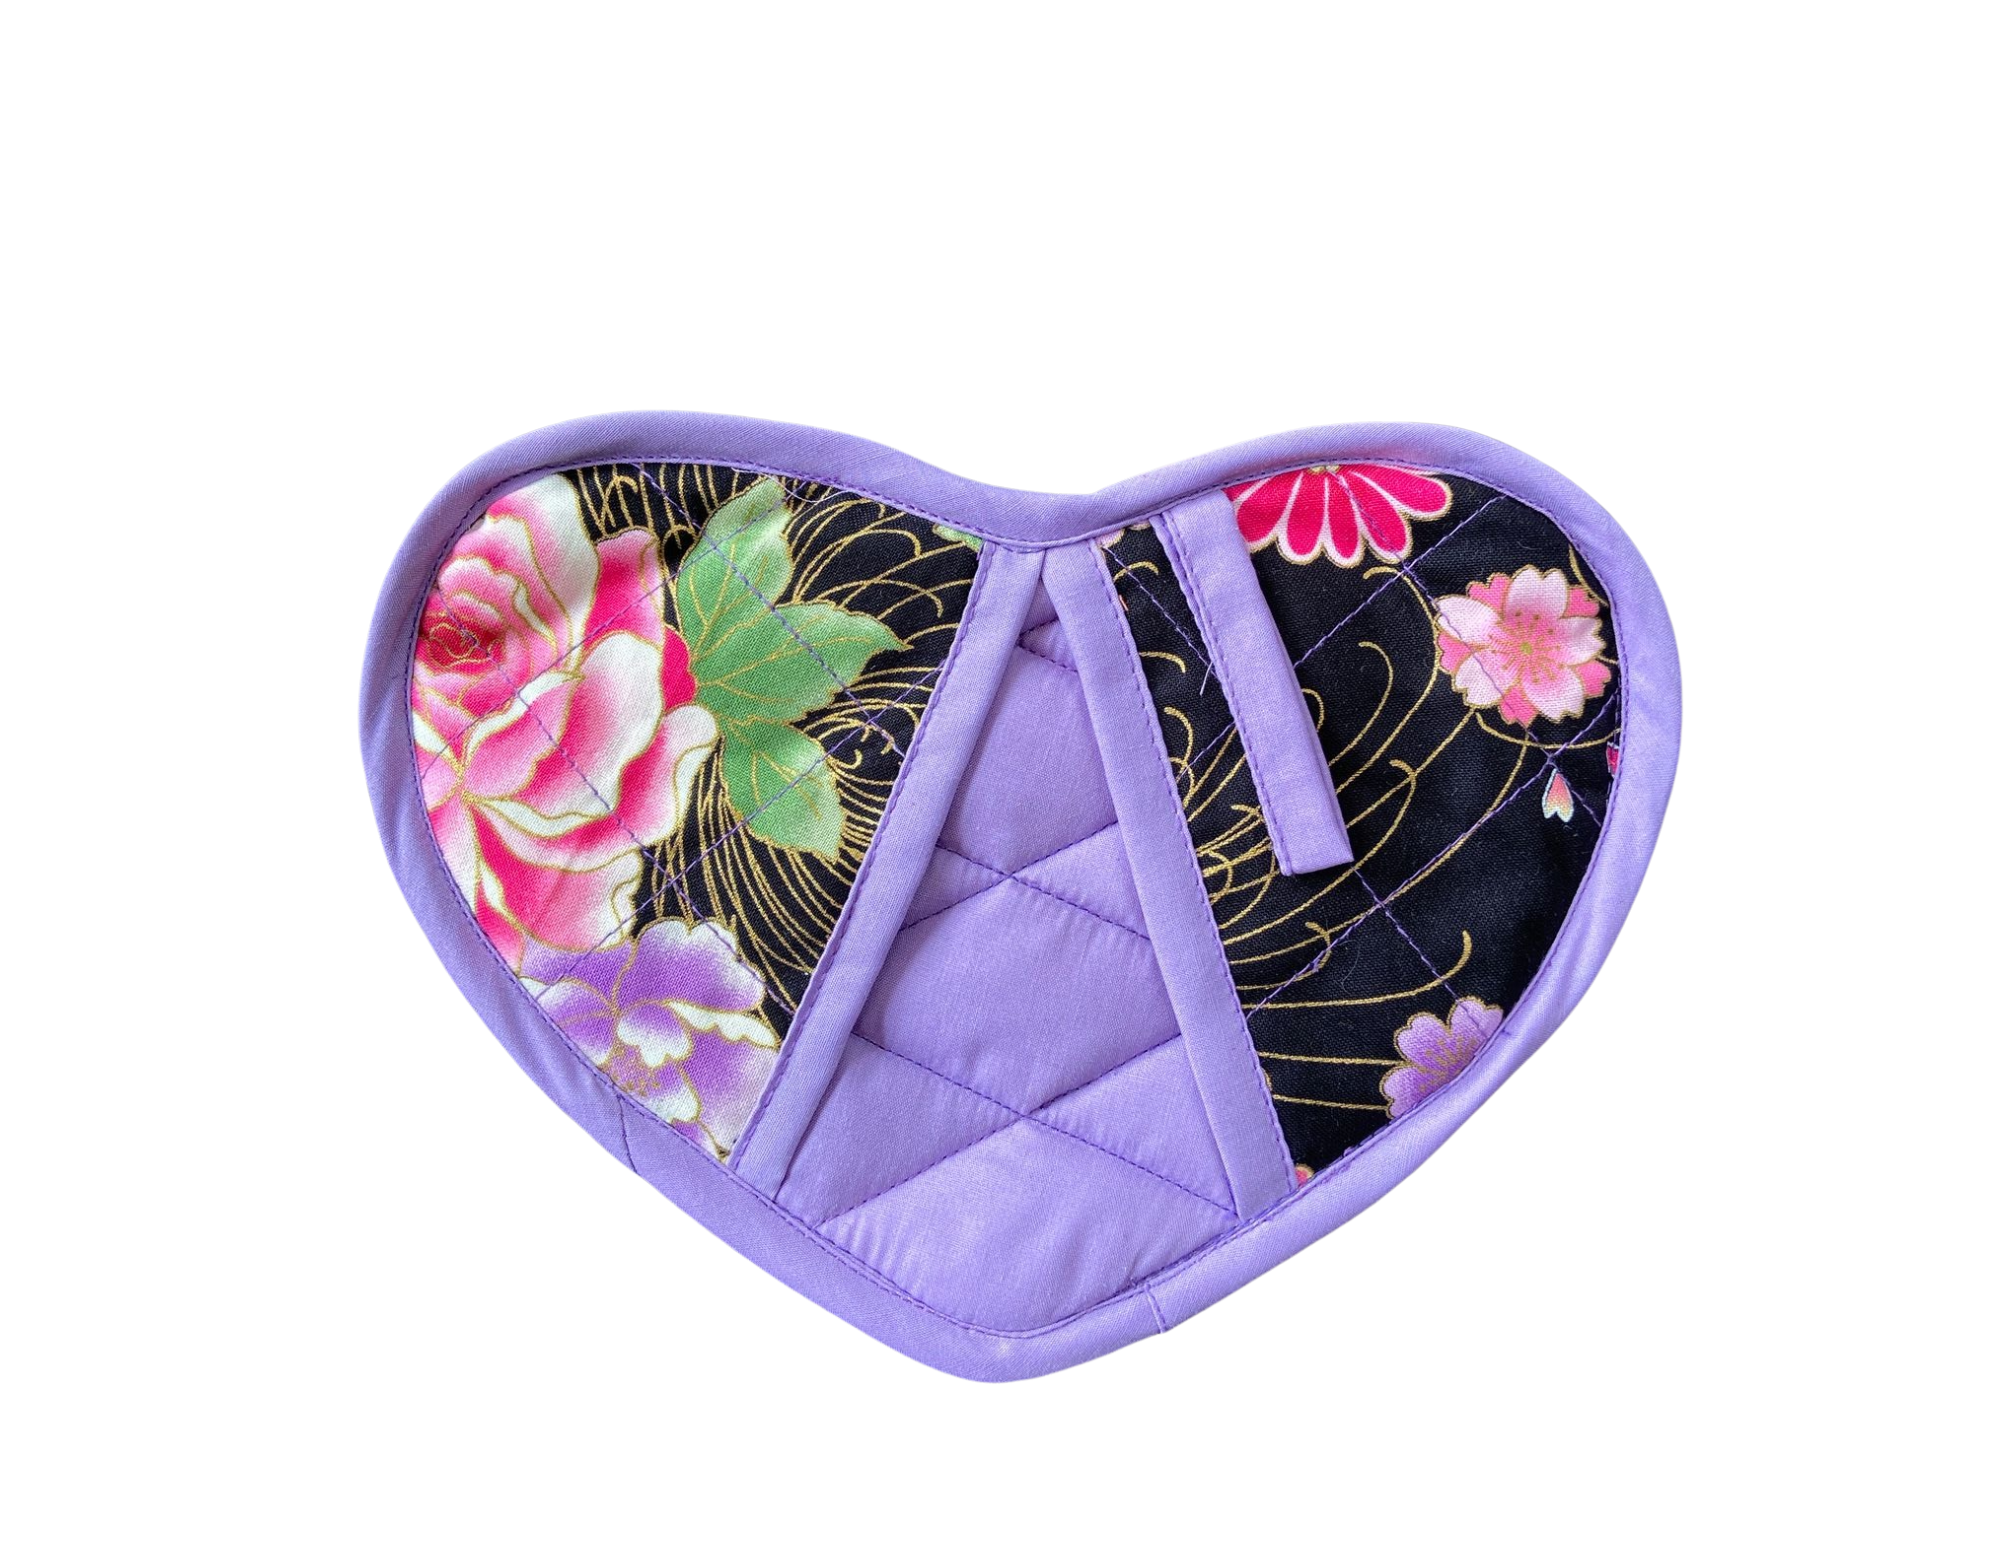 Heart shaped Pot holder-Oven Mitten-Placemat Sets (2 in a pack)